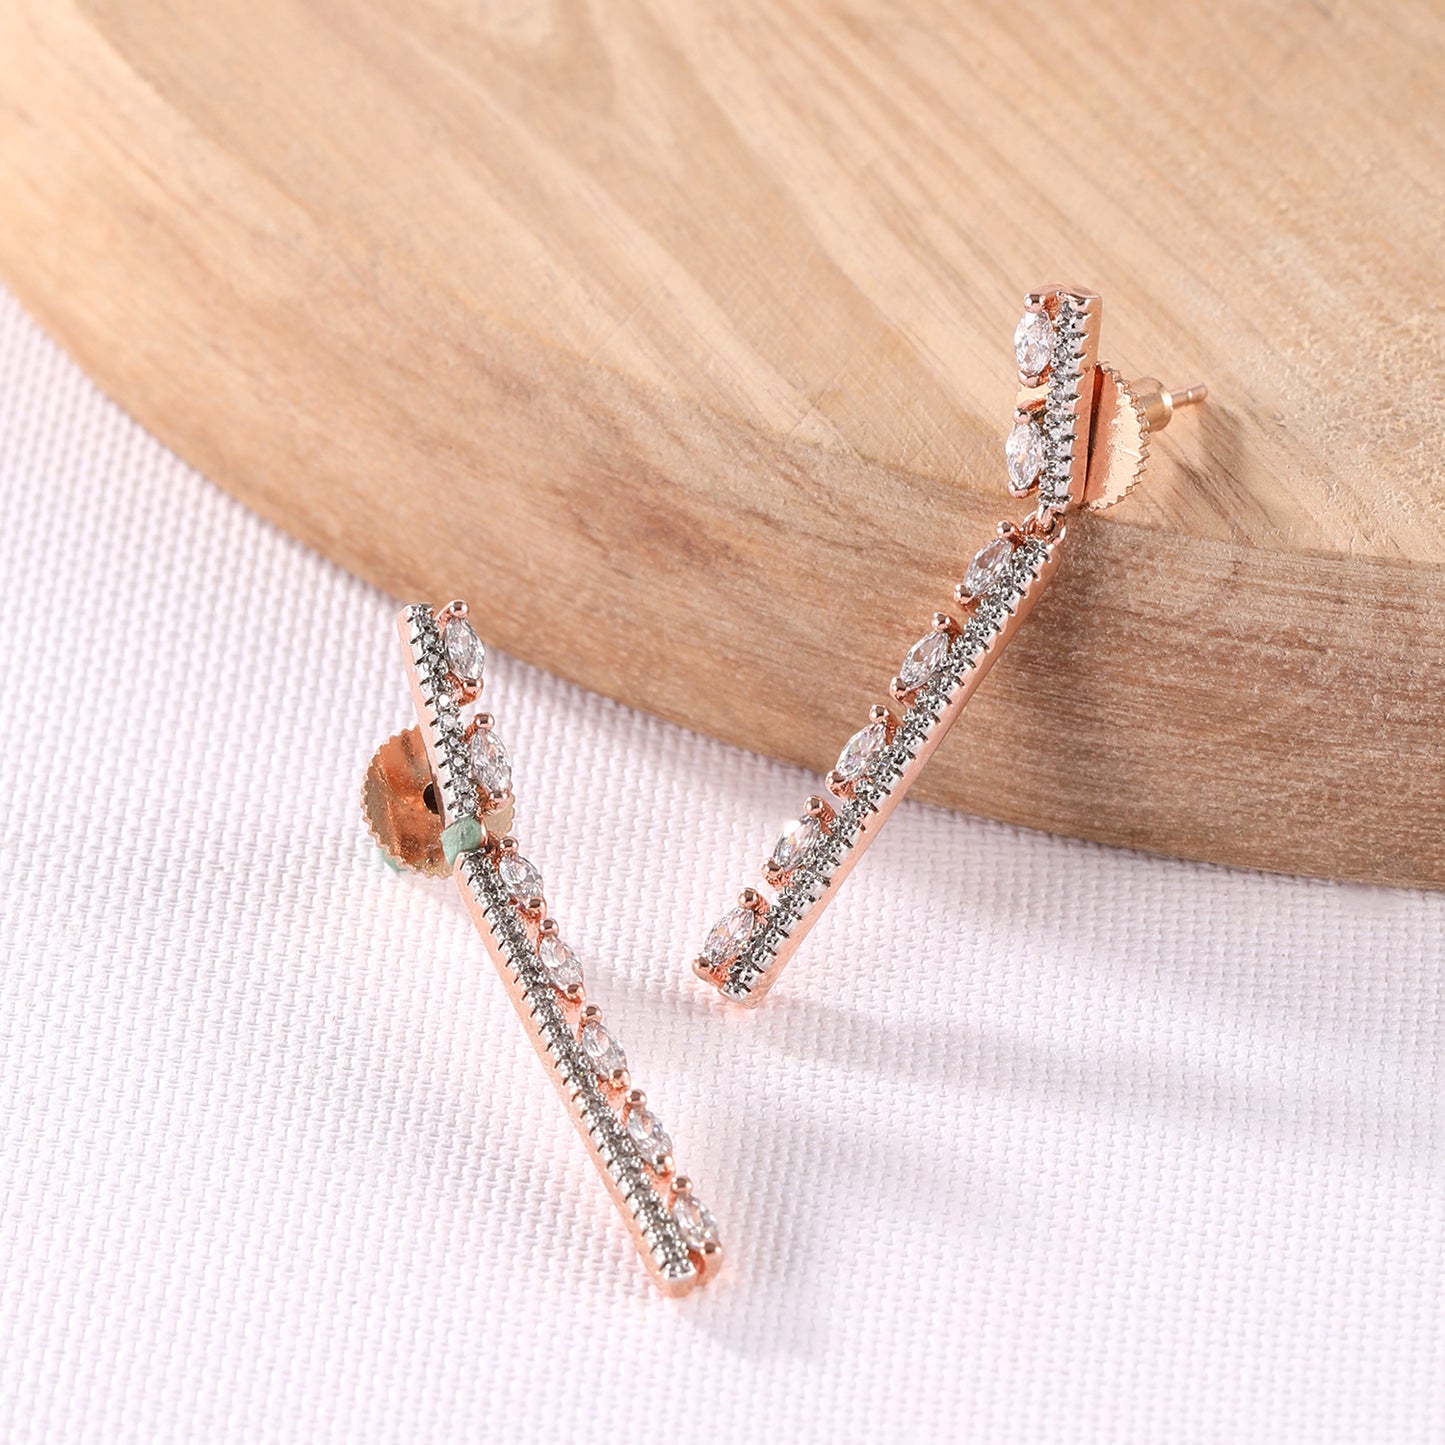 Rose Gold Art Deco Drop Earrings with Cubic Zirconia